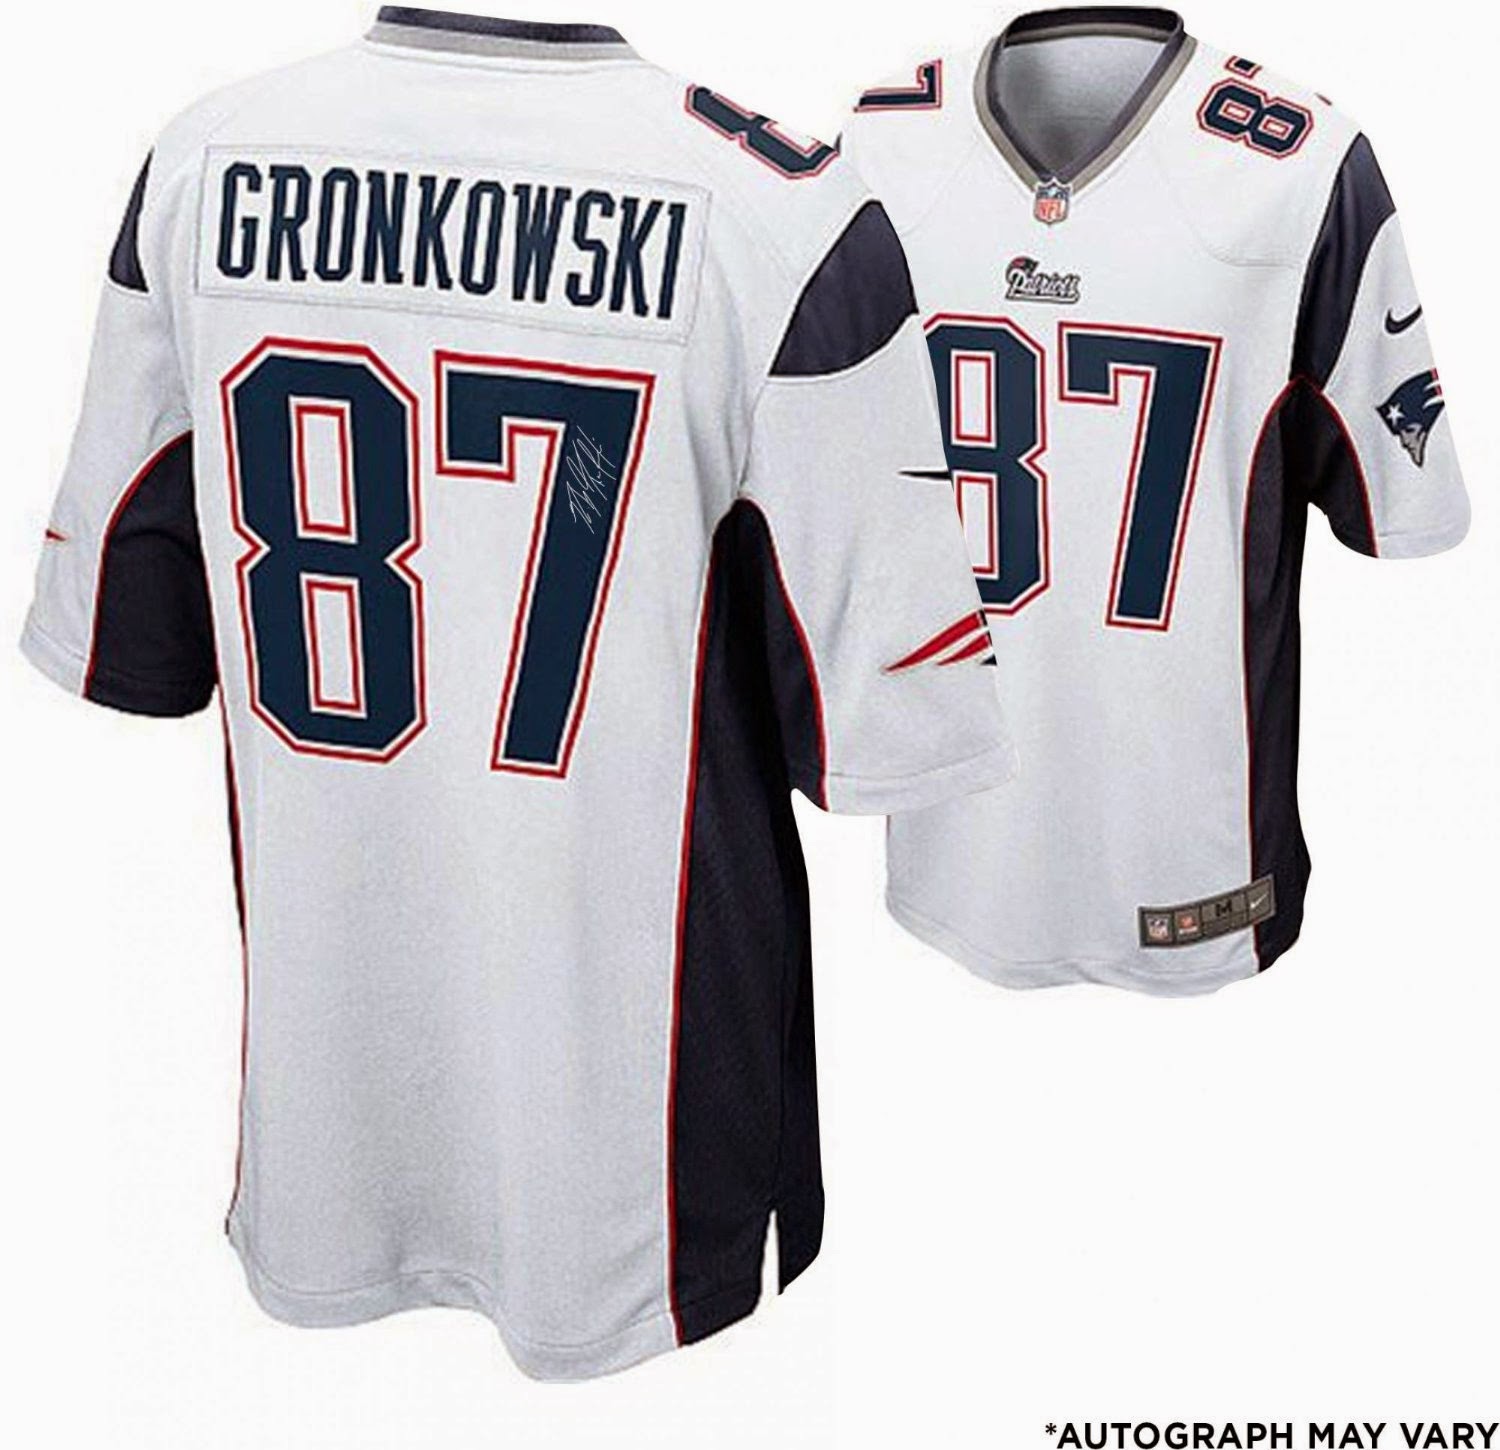 Rob Gronkowski Autographed Nike Elite White Jersey (with Certificate)